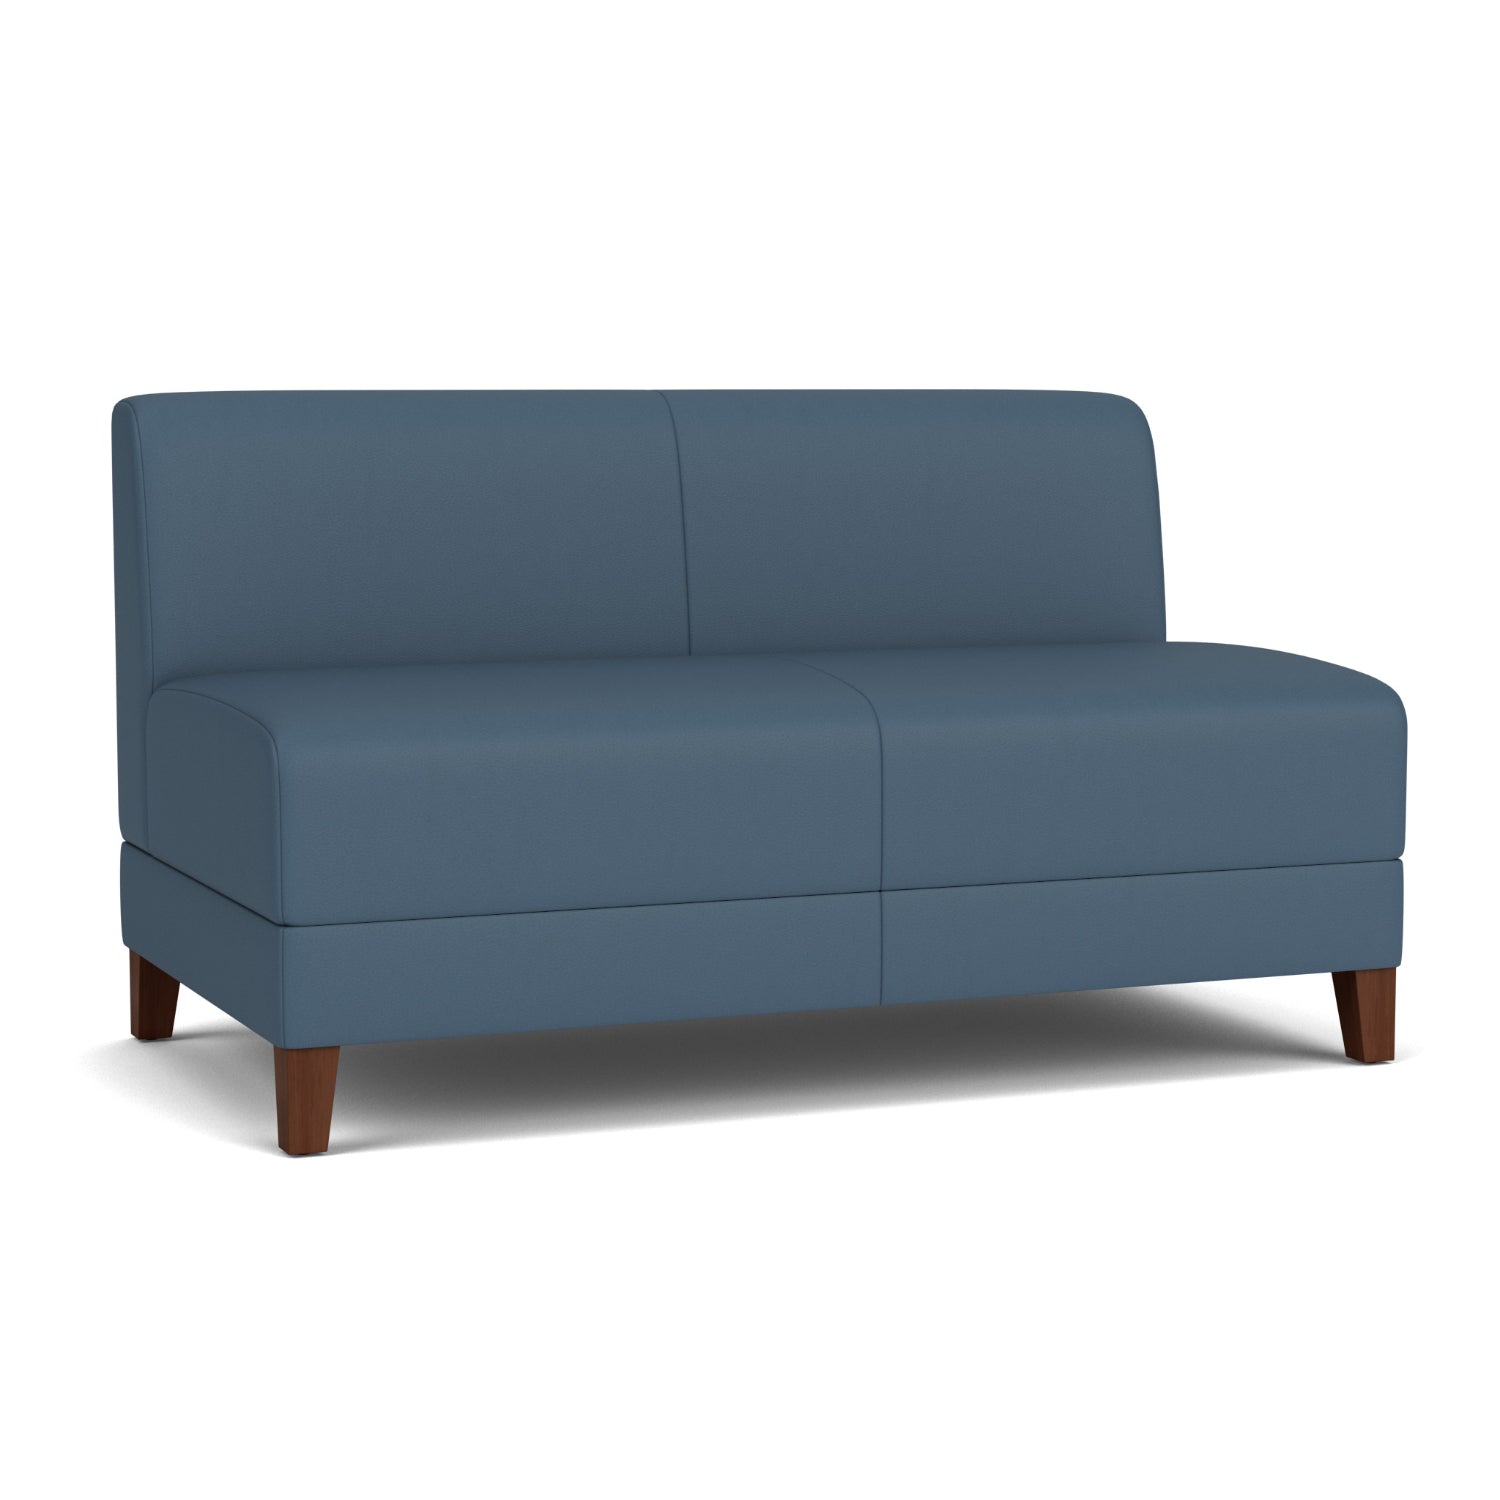 Fremont Collection Reception Seating, Armless Loveseat, Standard Vinyl Upholstery, FREE SHIPPING